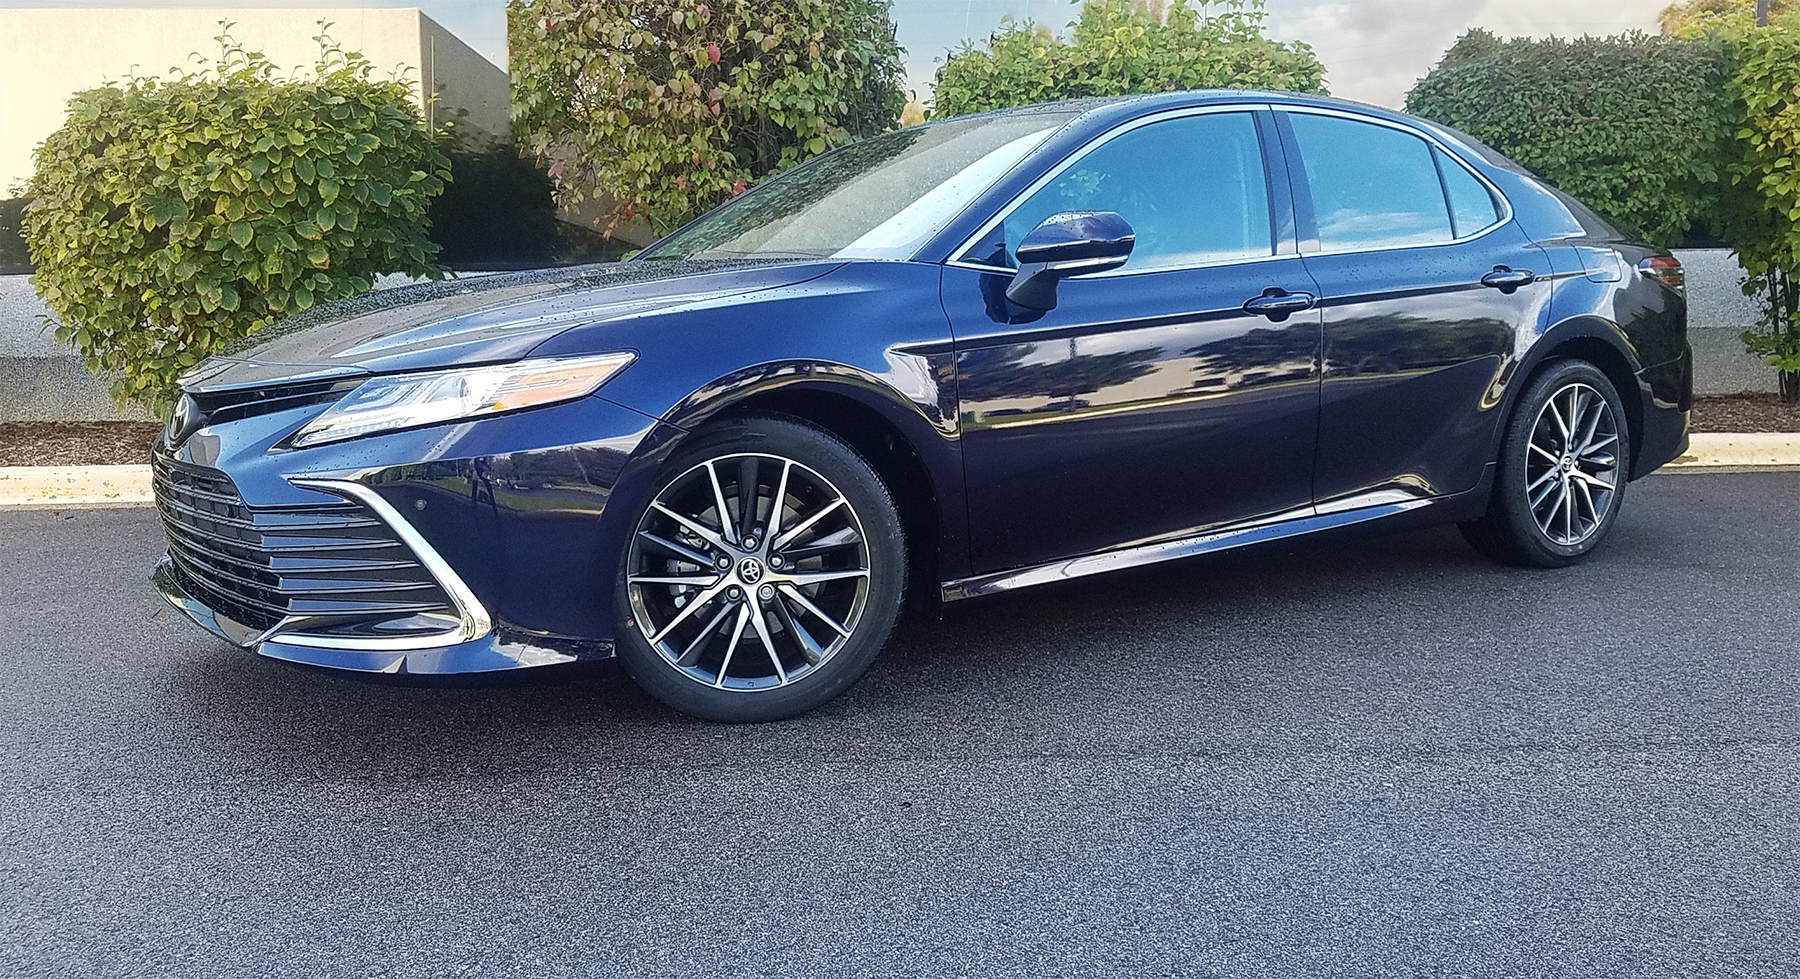 First Spin: 2021 Toyota Camry | The Daily Drive | Consumer Guide® The